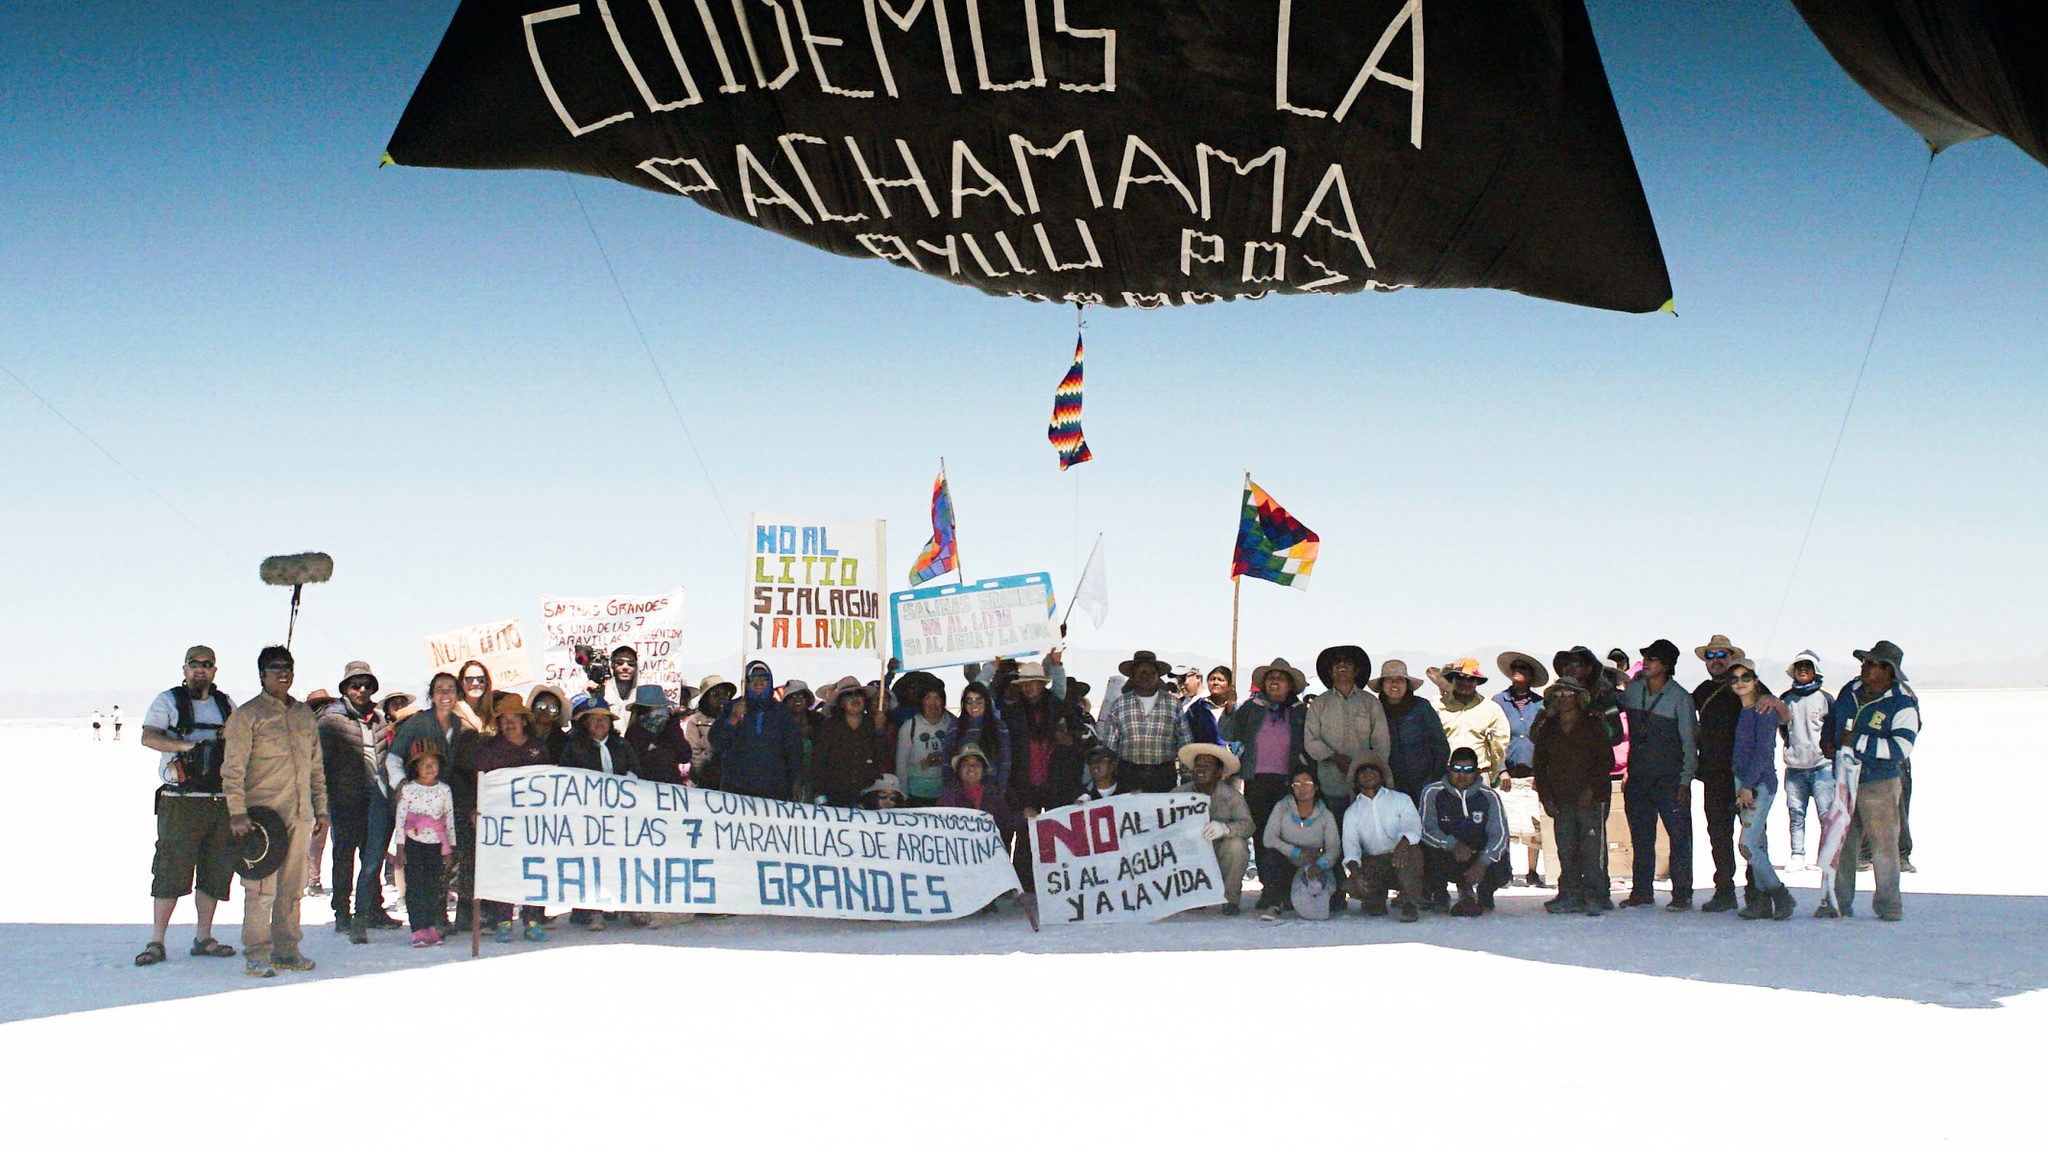 A group of people gather with activist banners beneath a black hot air balloon on a white salt flat